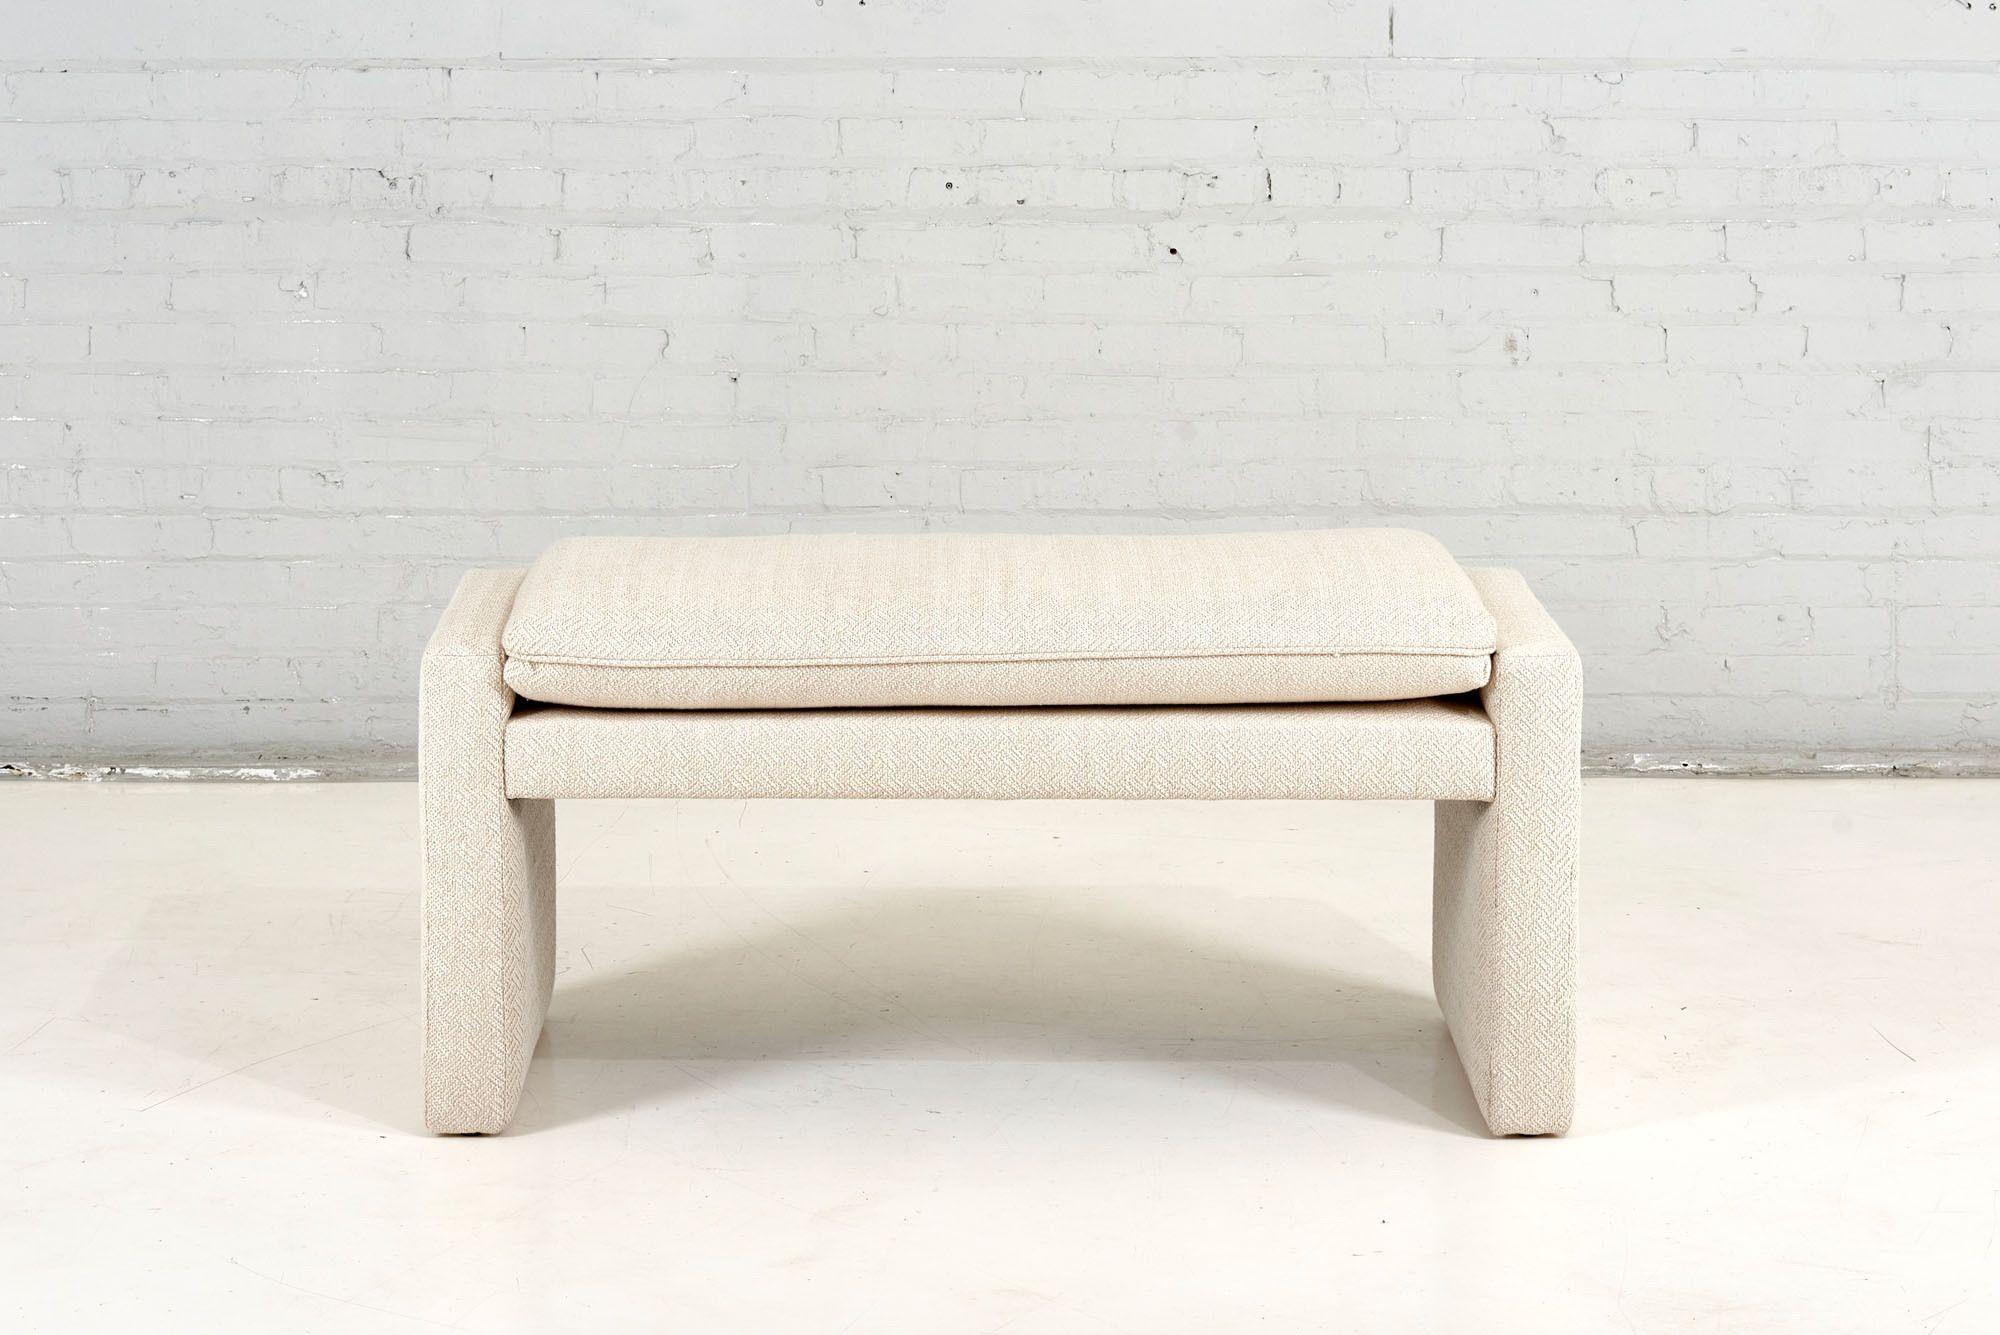 Bench by Directional, 1970. Restored and reupholstered.